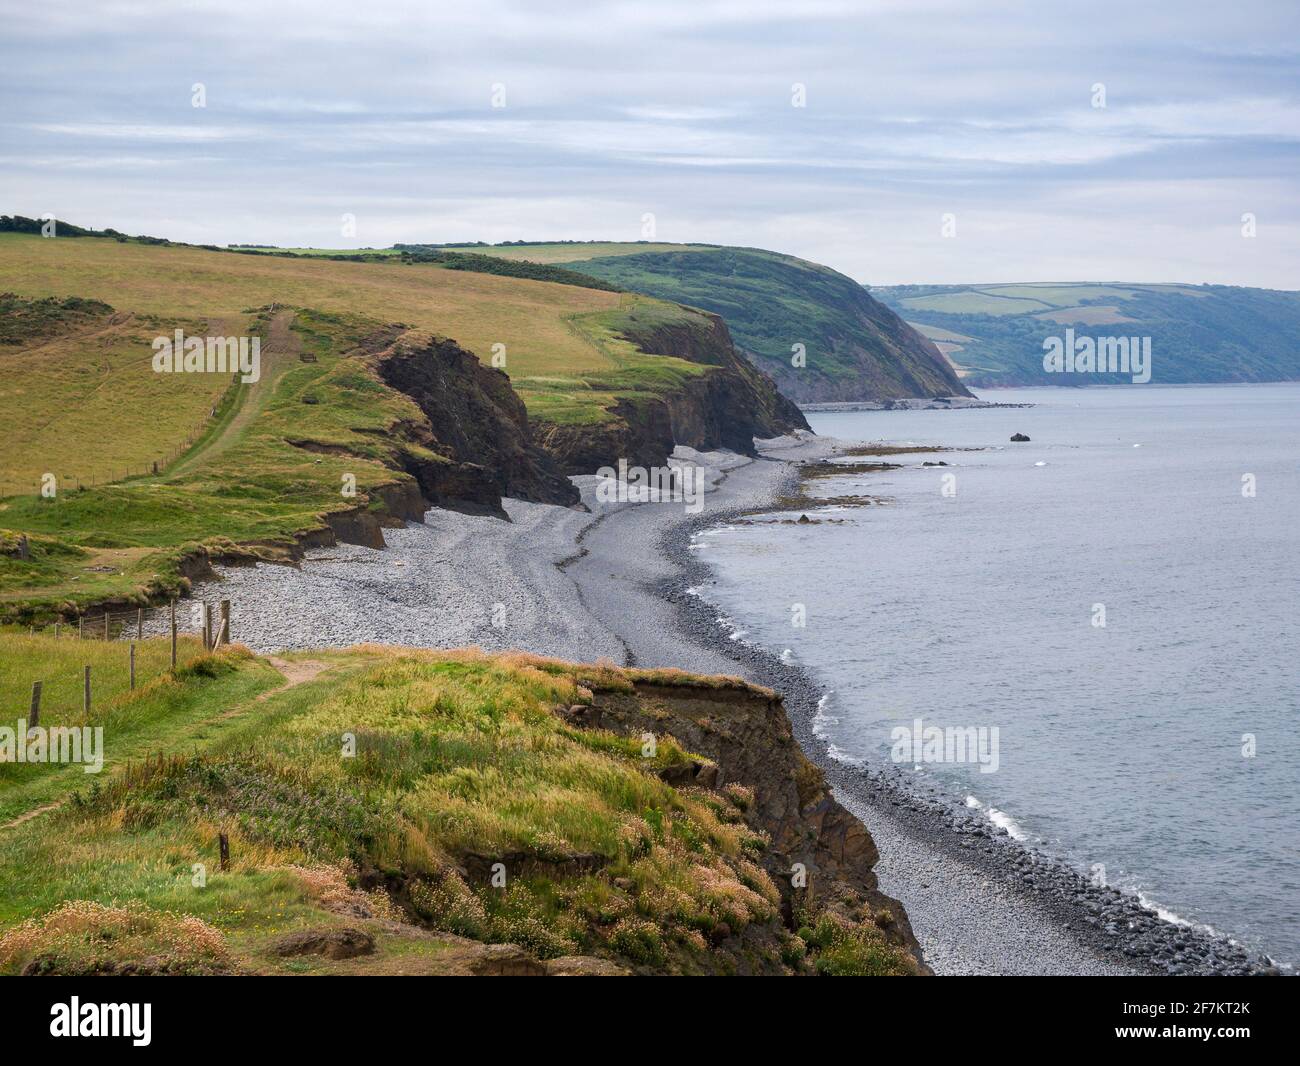 Cornborough Cliff on the North Devon Coast Area of Outstanding Natural Beauty between Westward Ho! and Clovelly, England. Stock Photo